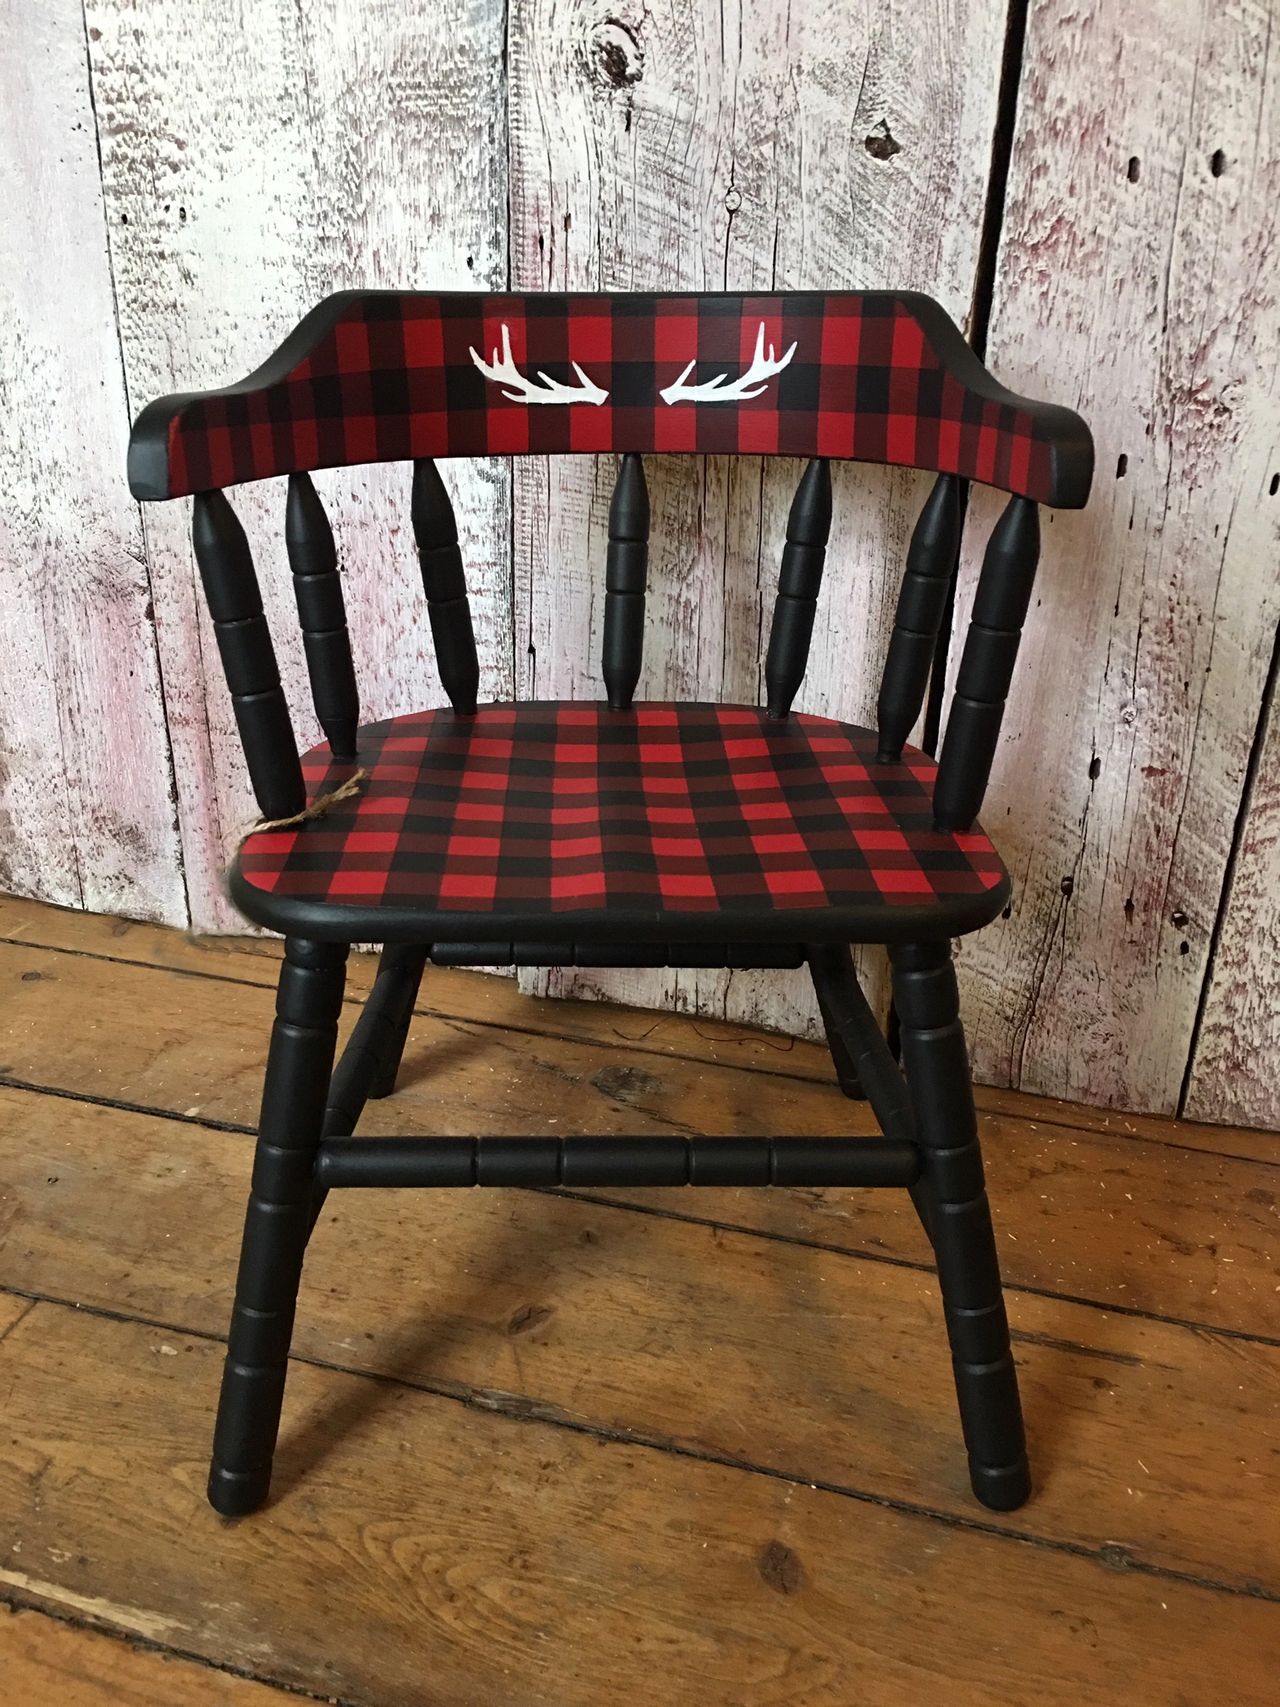 Buffalo Plaid Painted Wooden Stars — Redefined Kreative